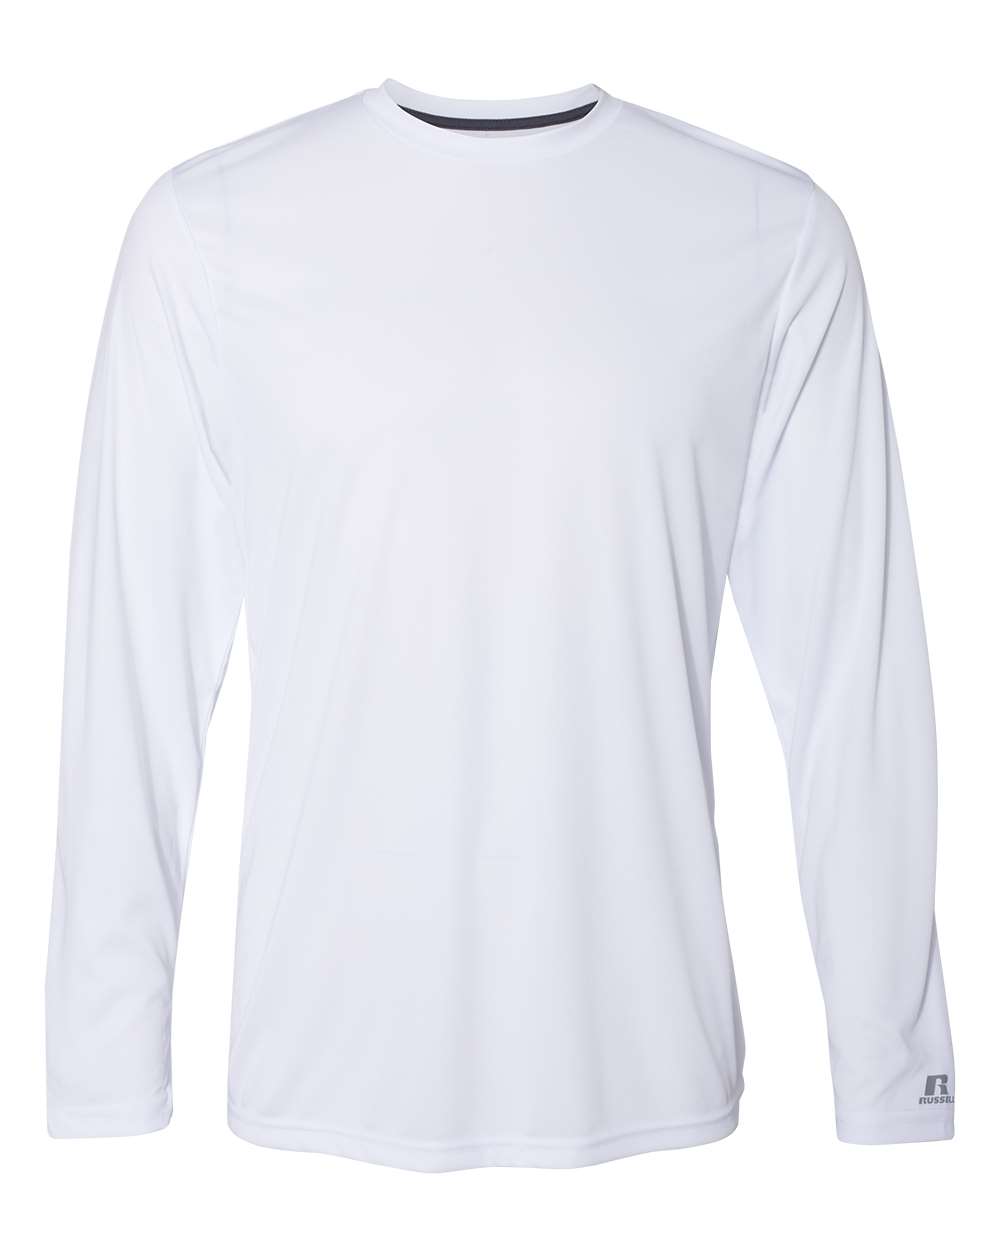 RUSSELL ATHLETIC White Long Sleeve Men's T-Shirt Small